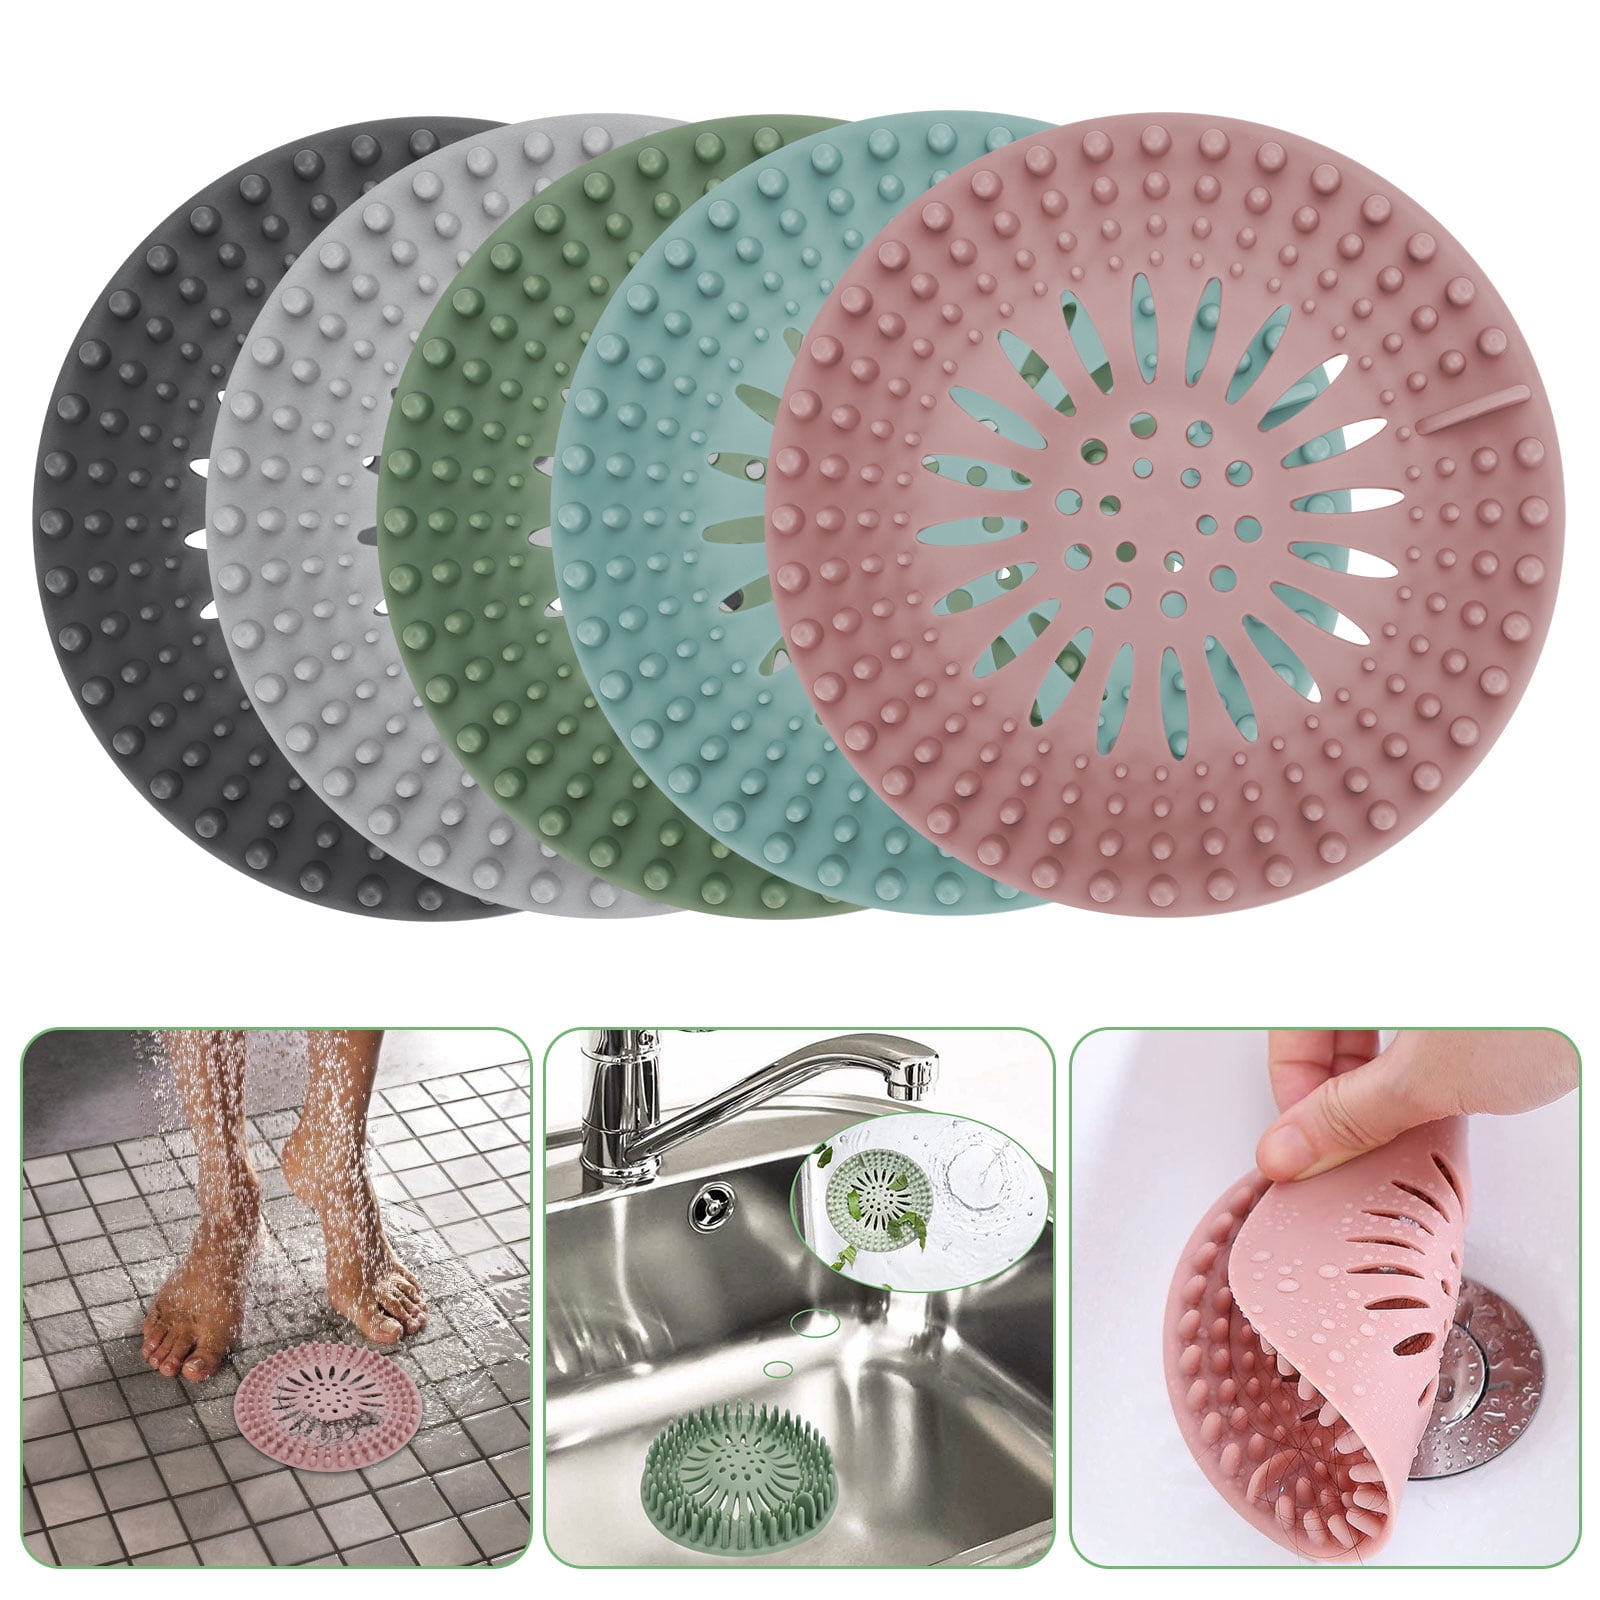 /Suitable for Kitchen Bathroom Bathtub Catch Hair Impurities and Quick Draining. Sink XAJOON Drain Hair Catcher/Bathtub Shower Hair Drain Catcher Upgraded, Gold Patented Product